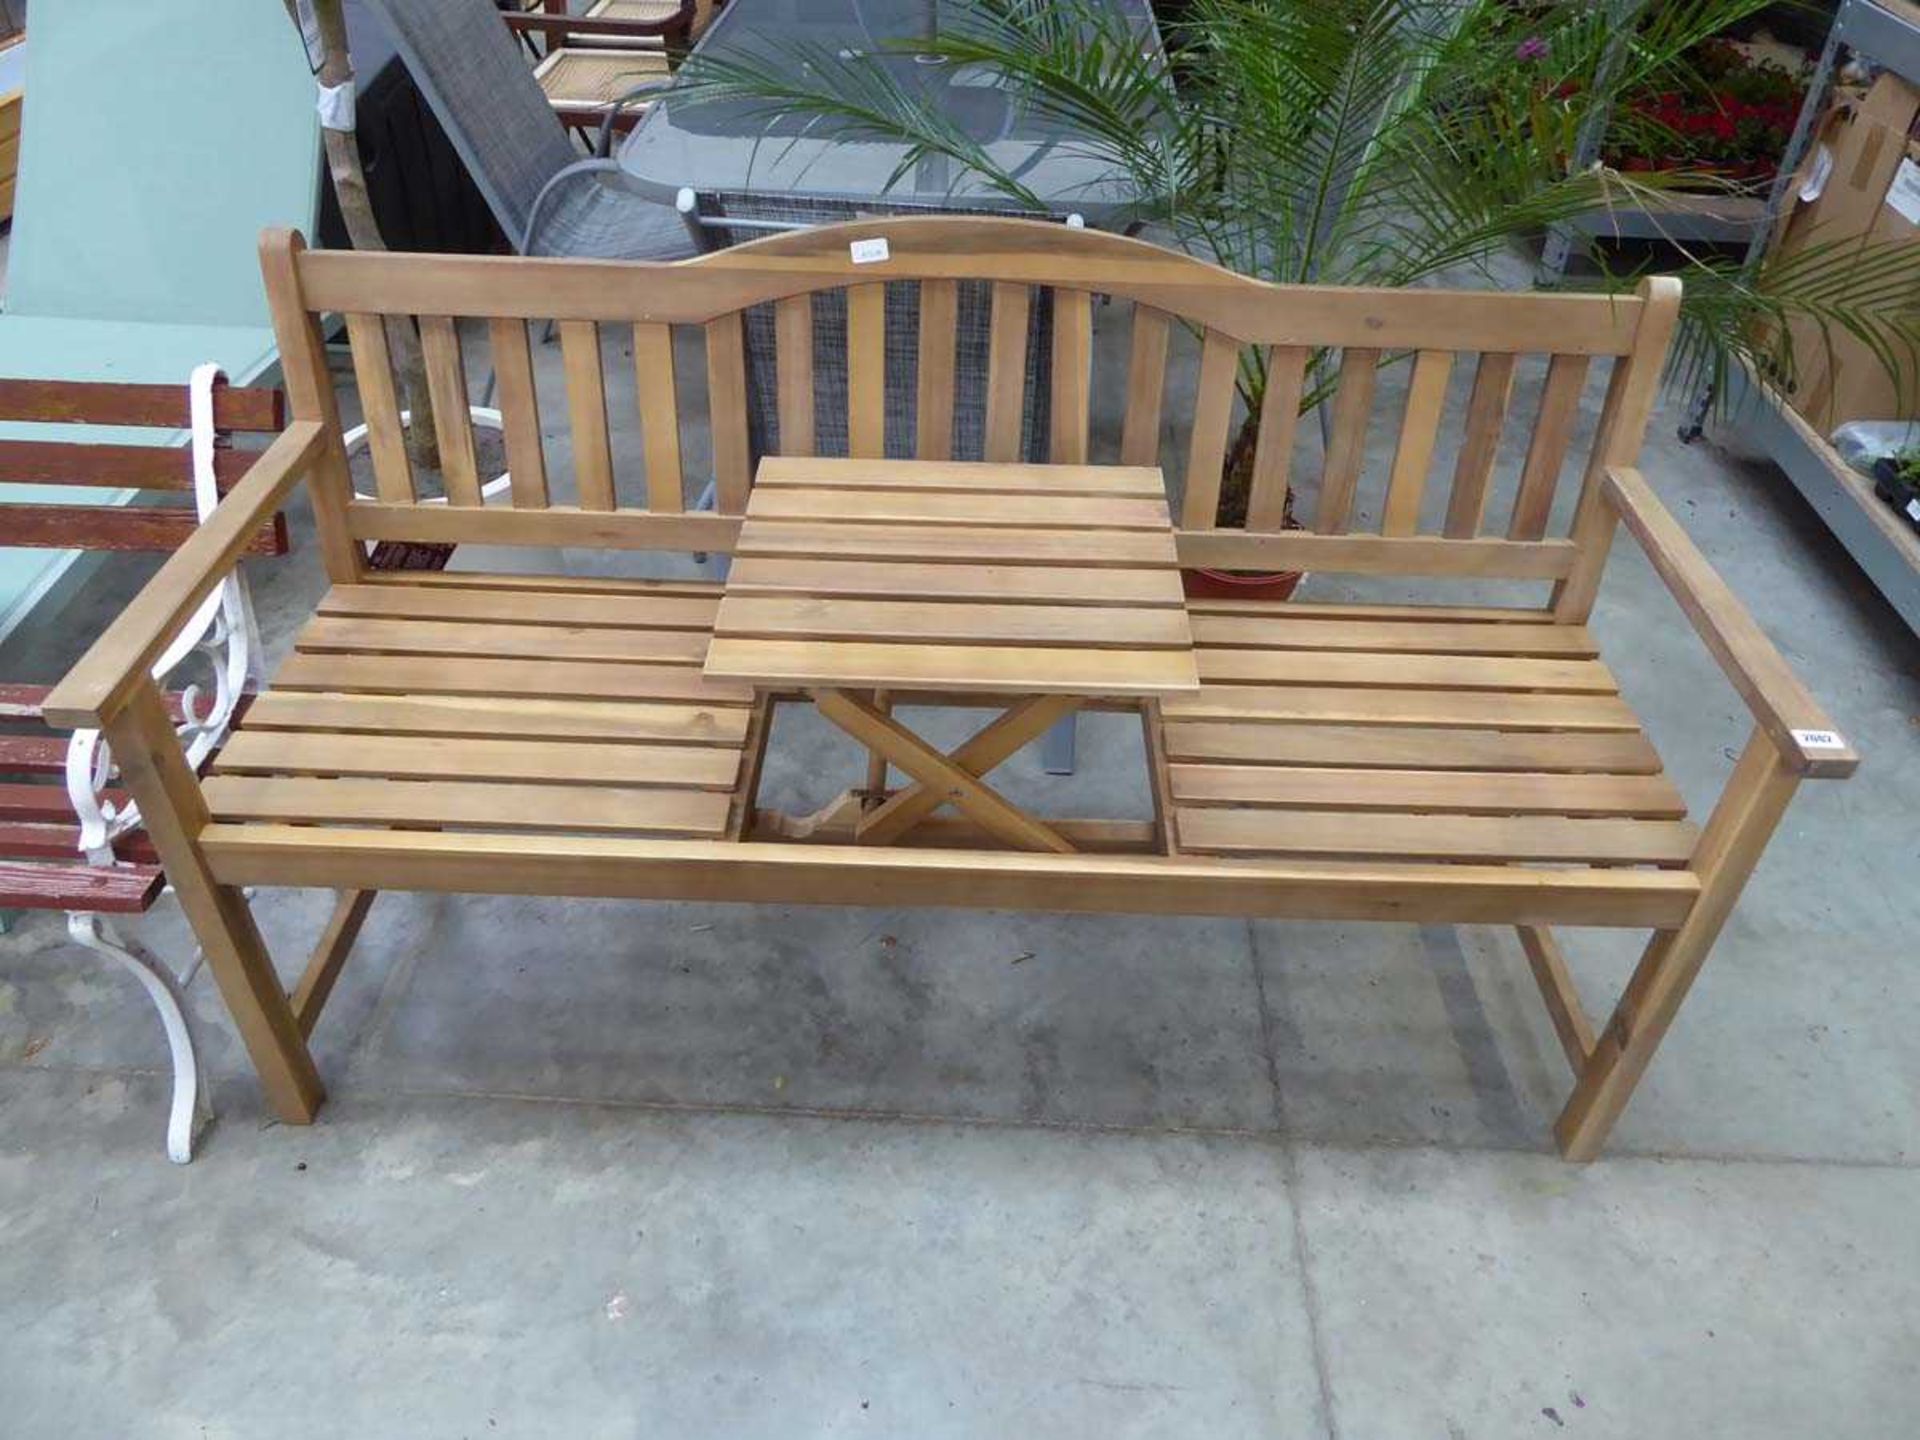 Teak wooden slated 3 seater garden bench with lift top middle section